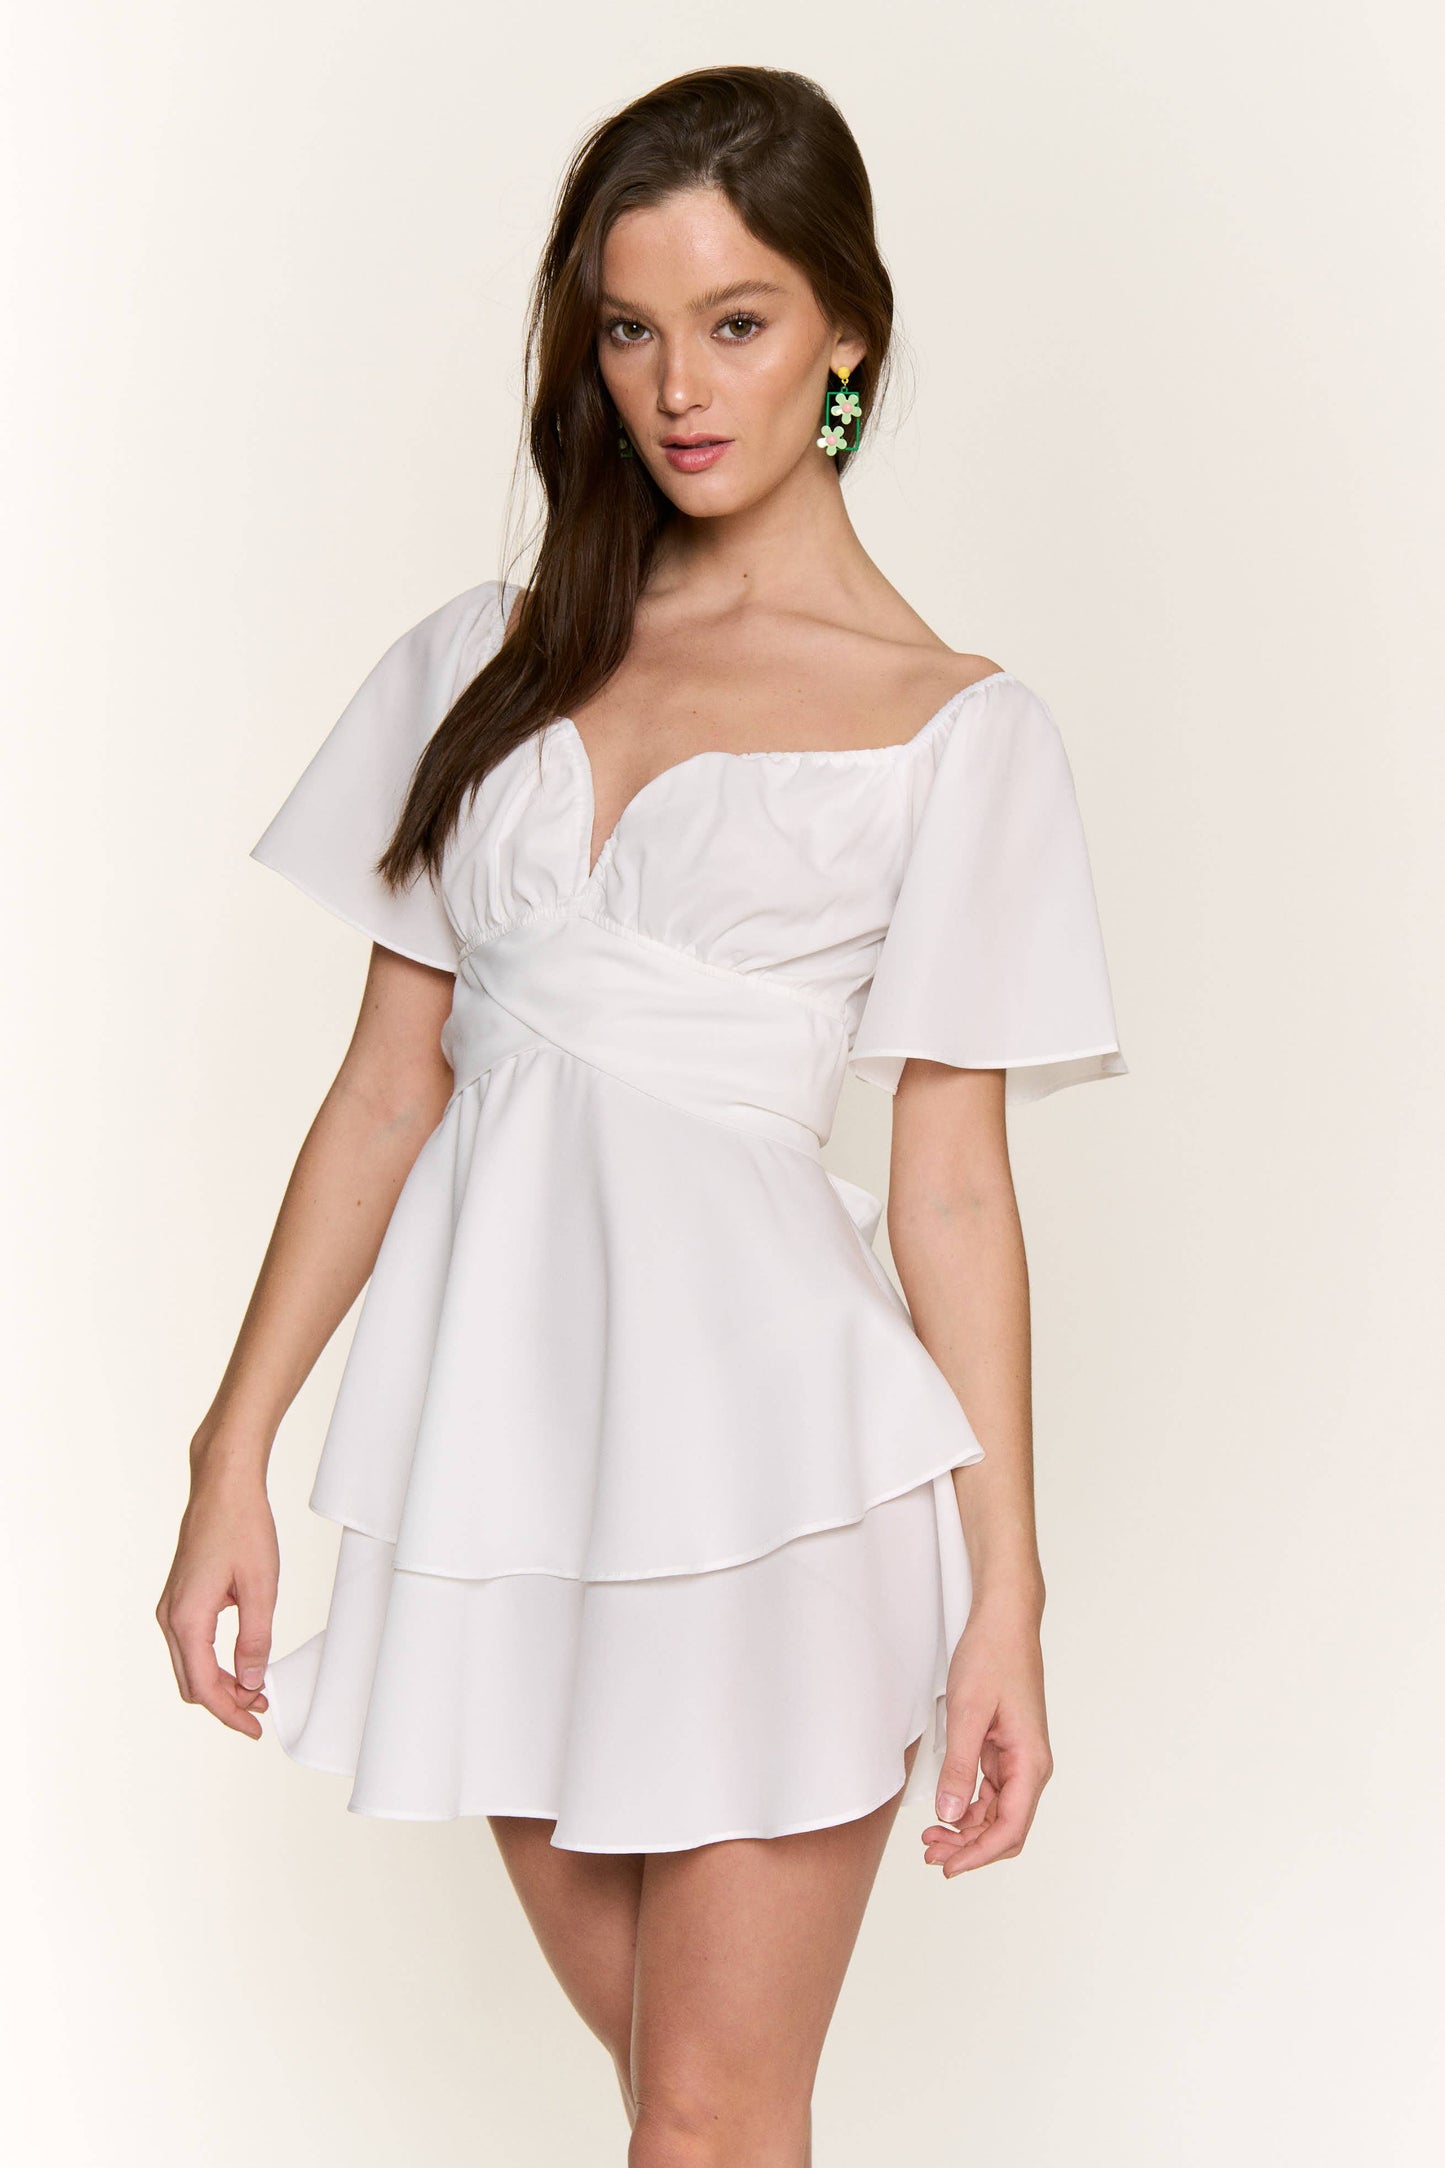 Hers & Mine - V WIRED BUST DOUBLE LAYERED DRESS OFF WHITE